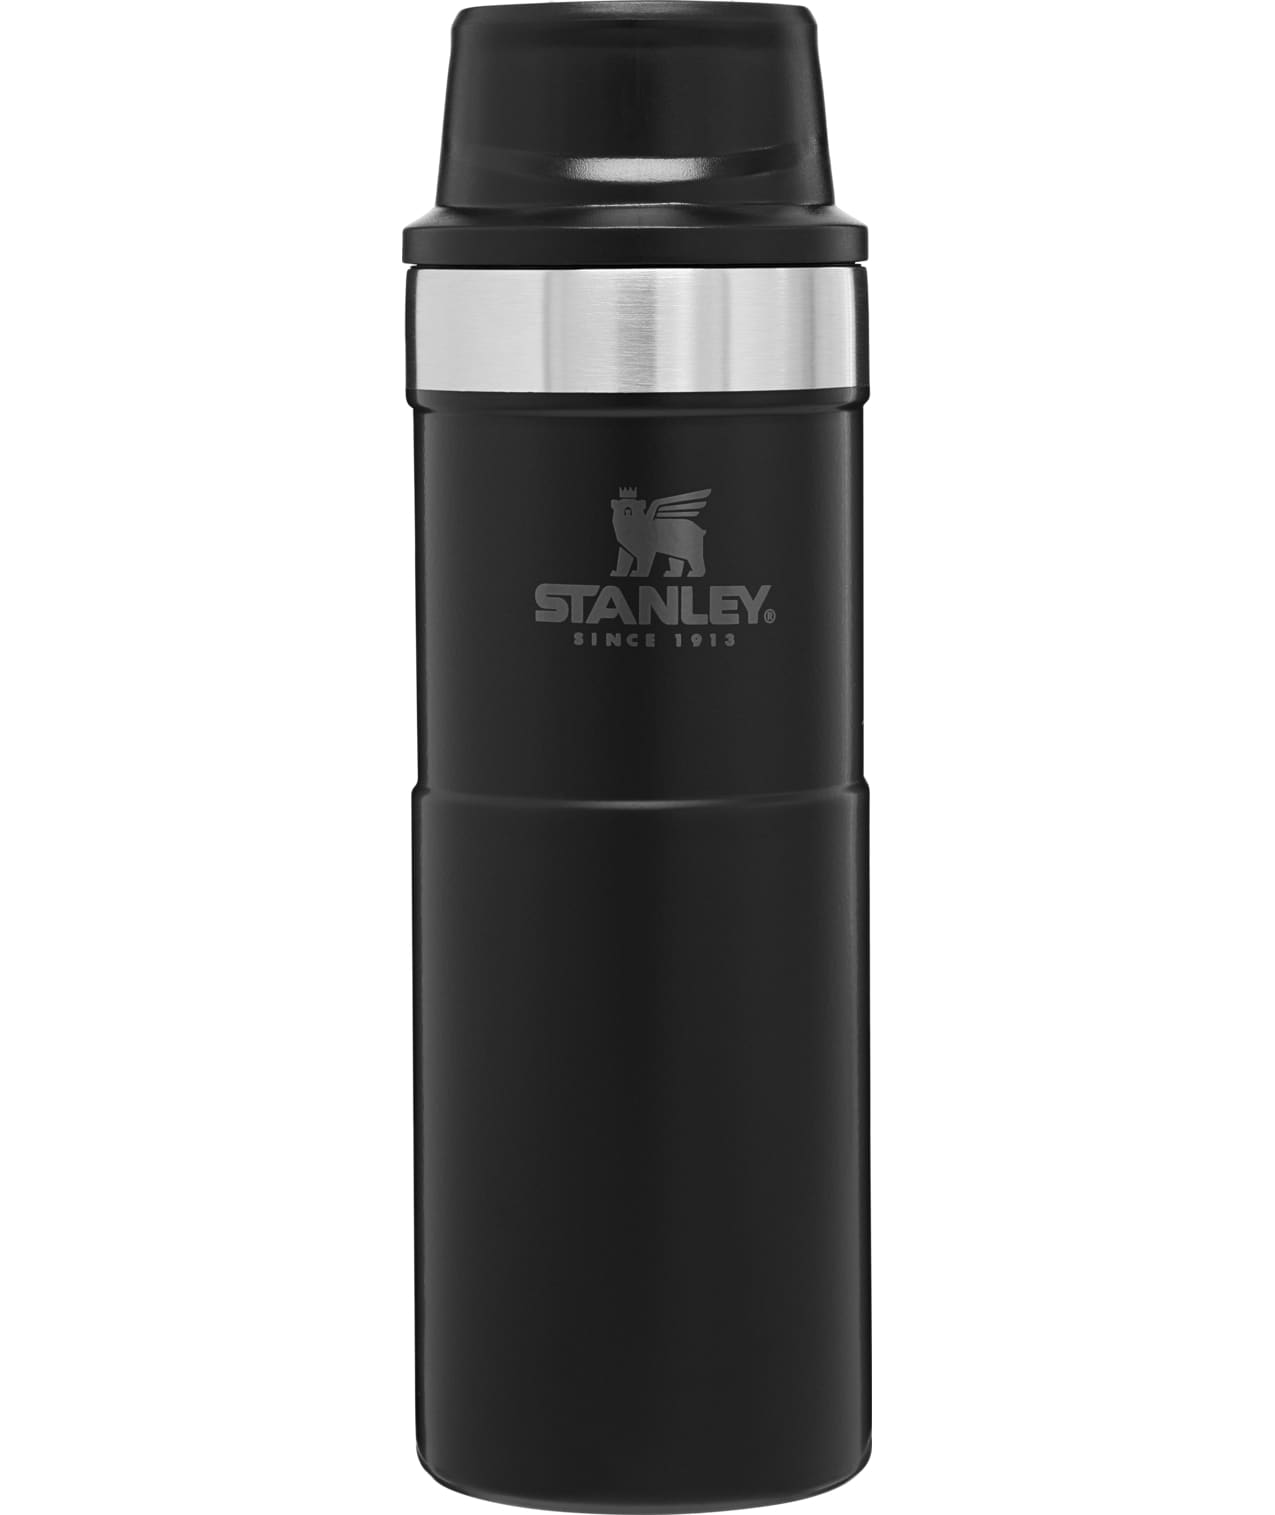 Stanley 16-fl oz Stainless Steel Insulated Travel Mug in the Water